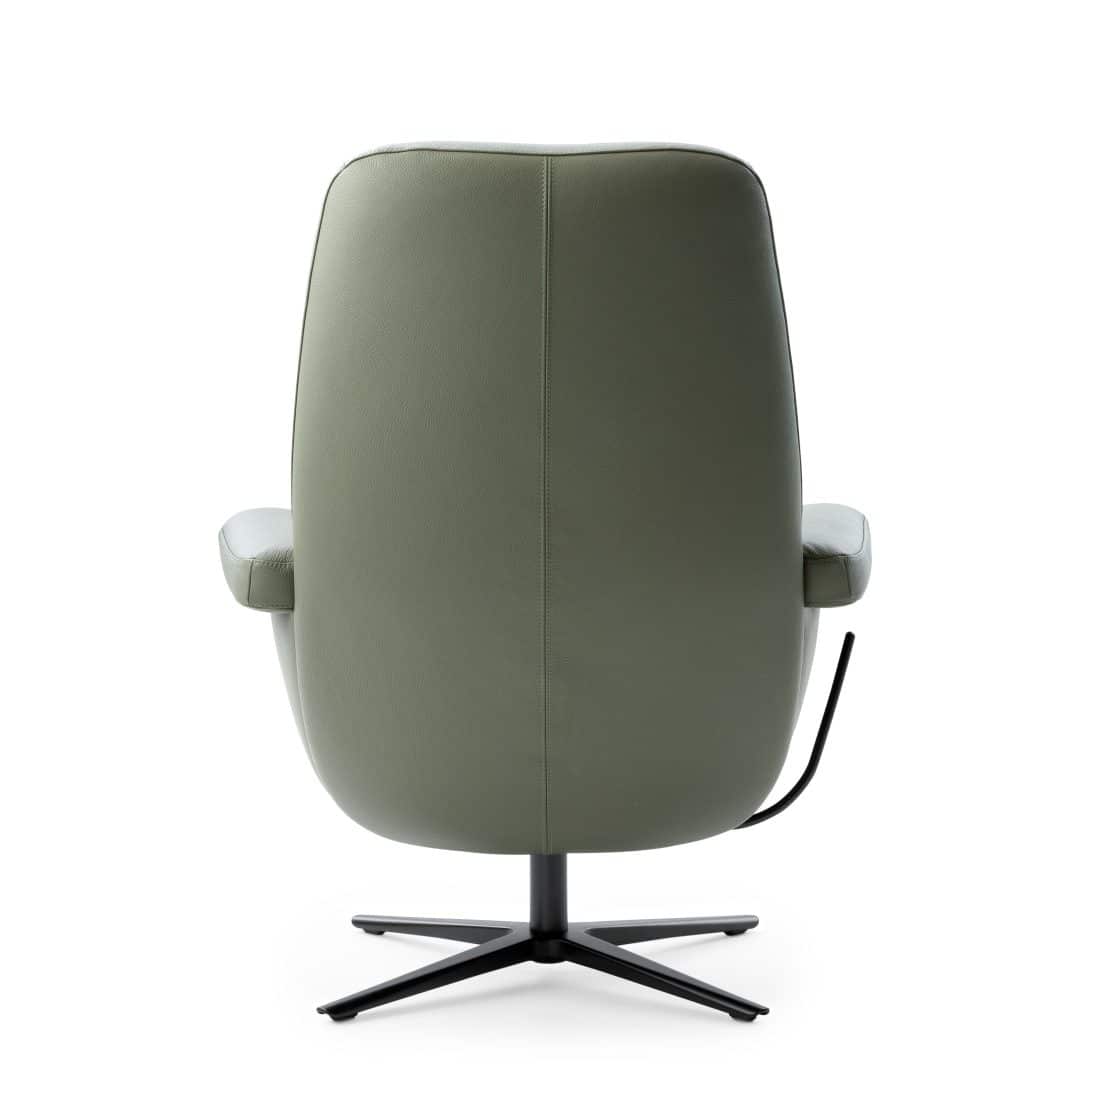 Vidence Entro One Amp Two Fauteuil